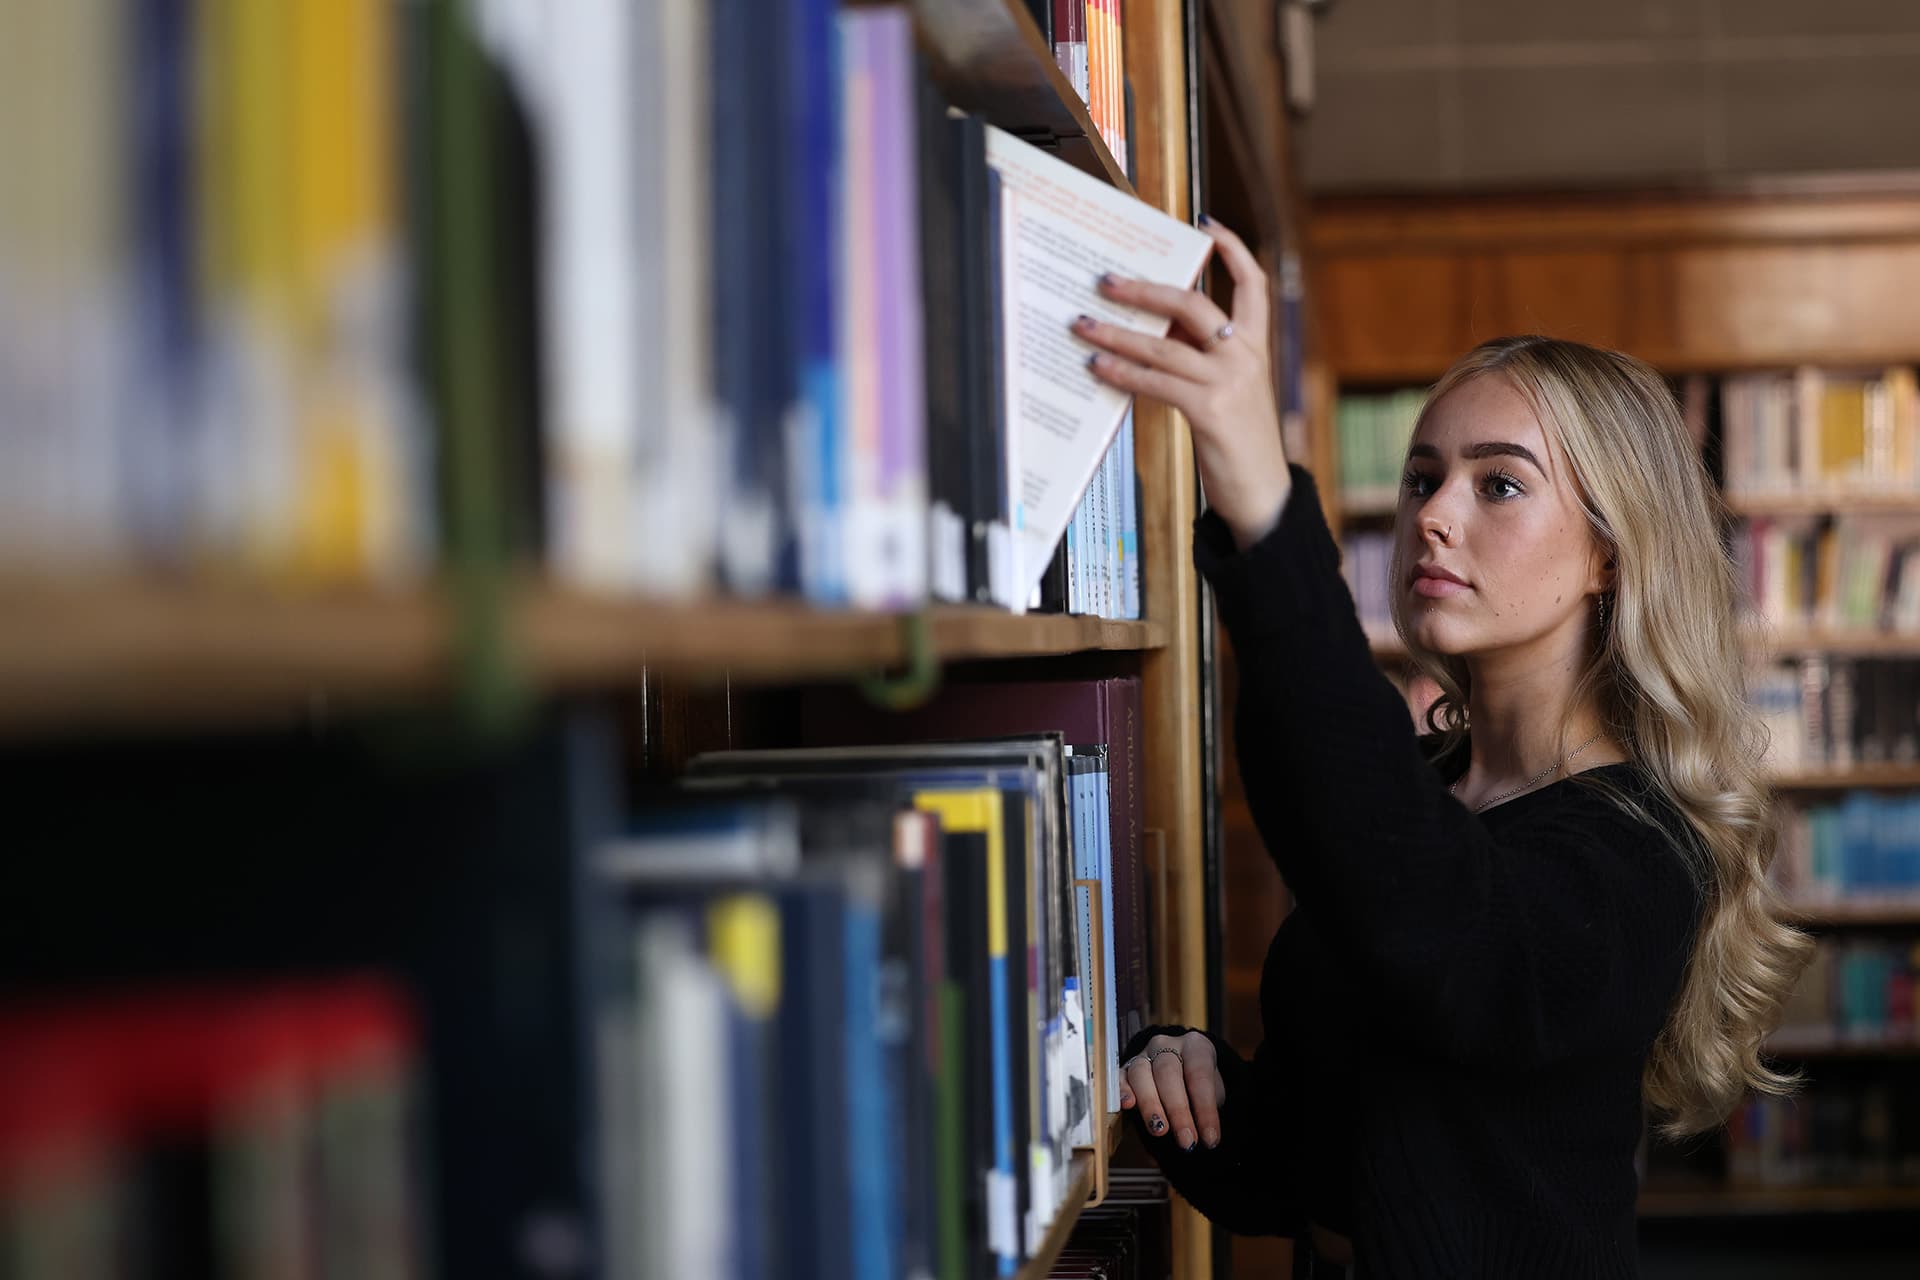 A blonde female student takes a book from a shelf in a library.